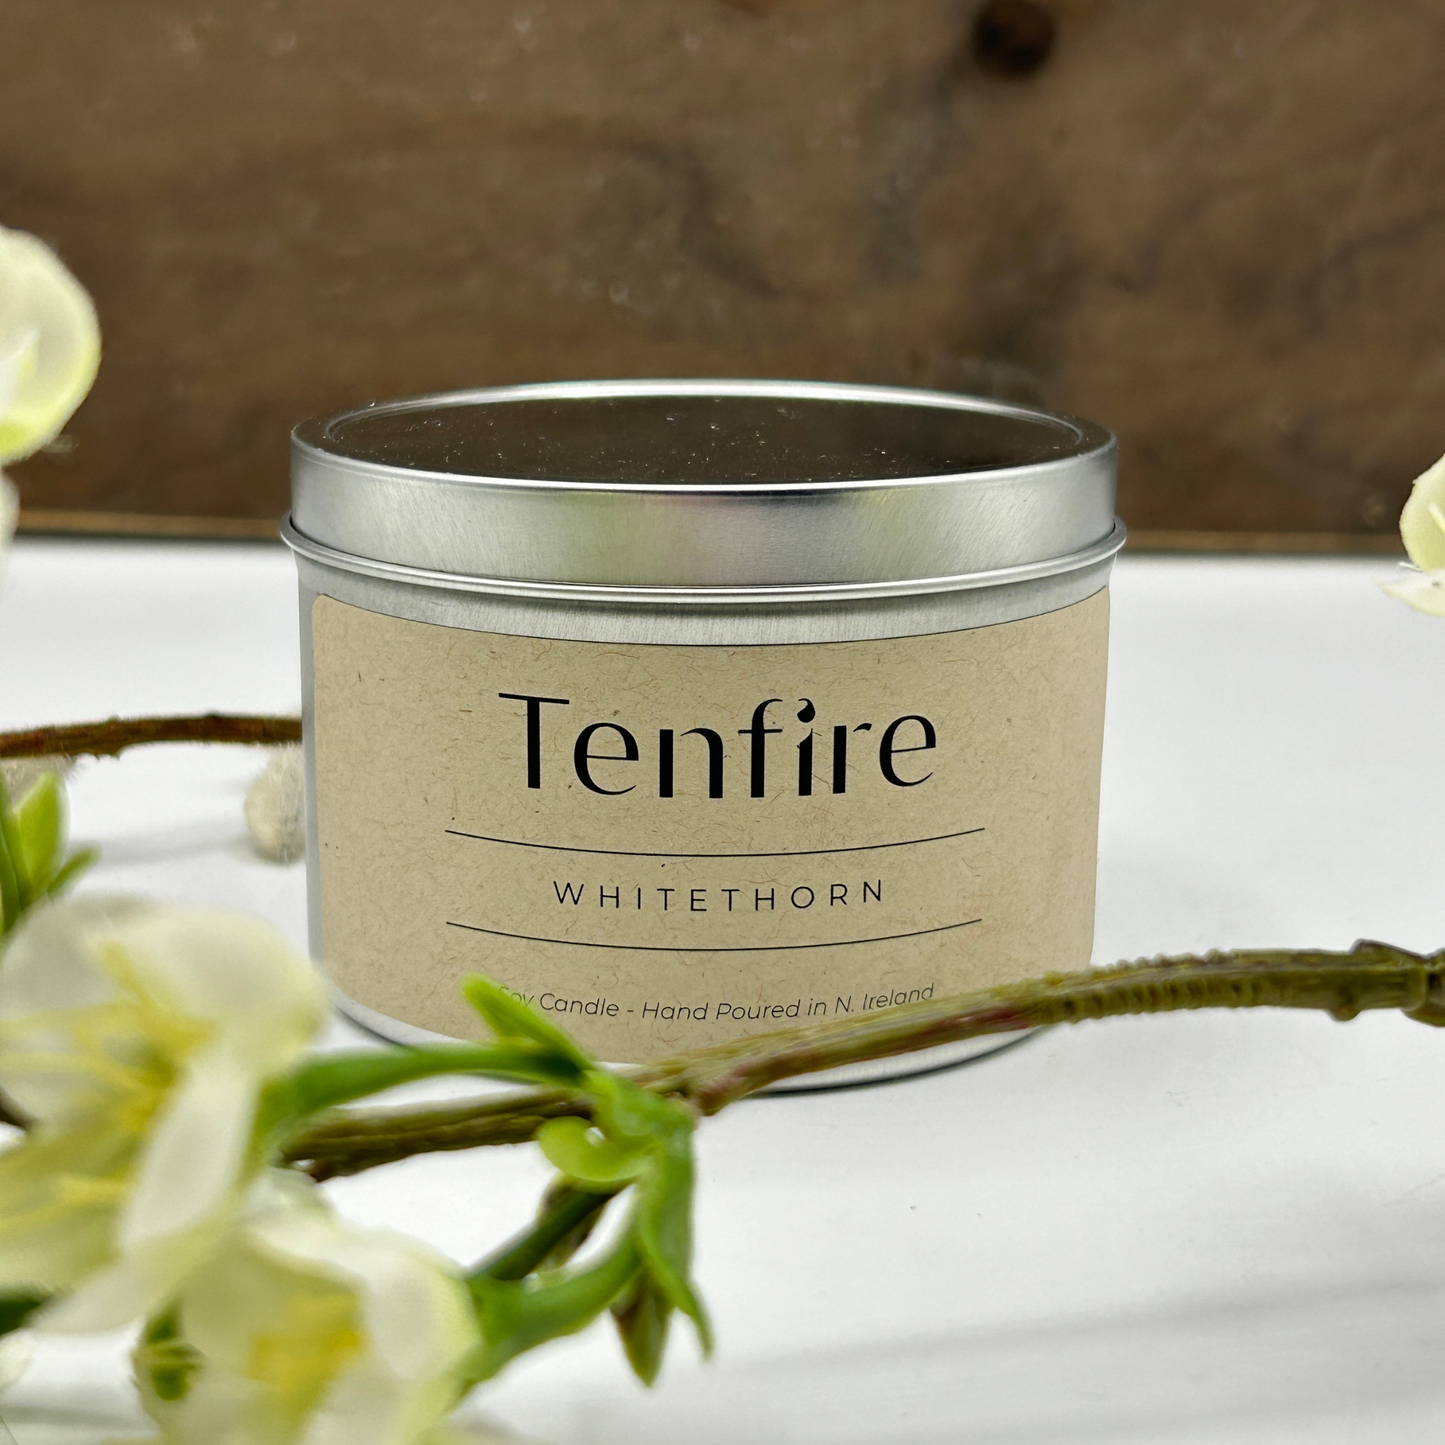 soy wax candle tin called Whitethorn, next to a hawthorn flower in front of wooden board